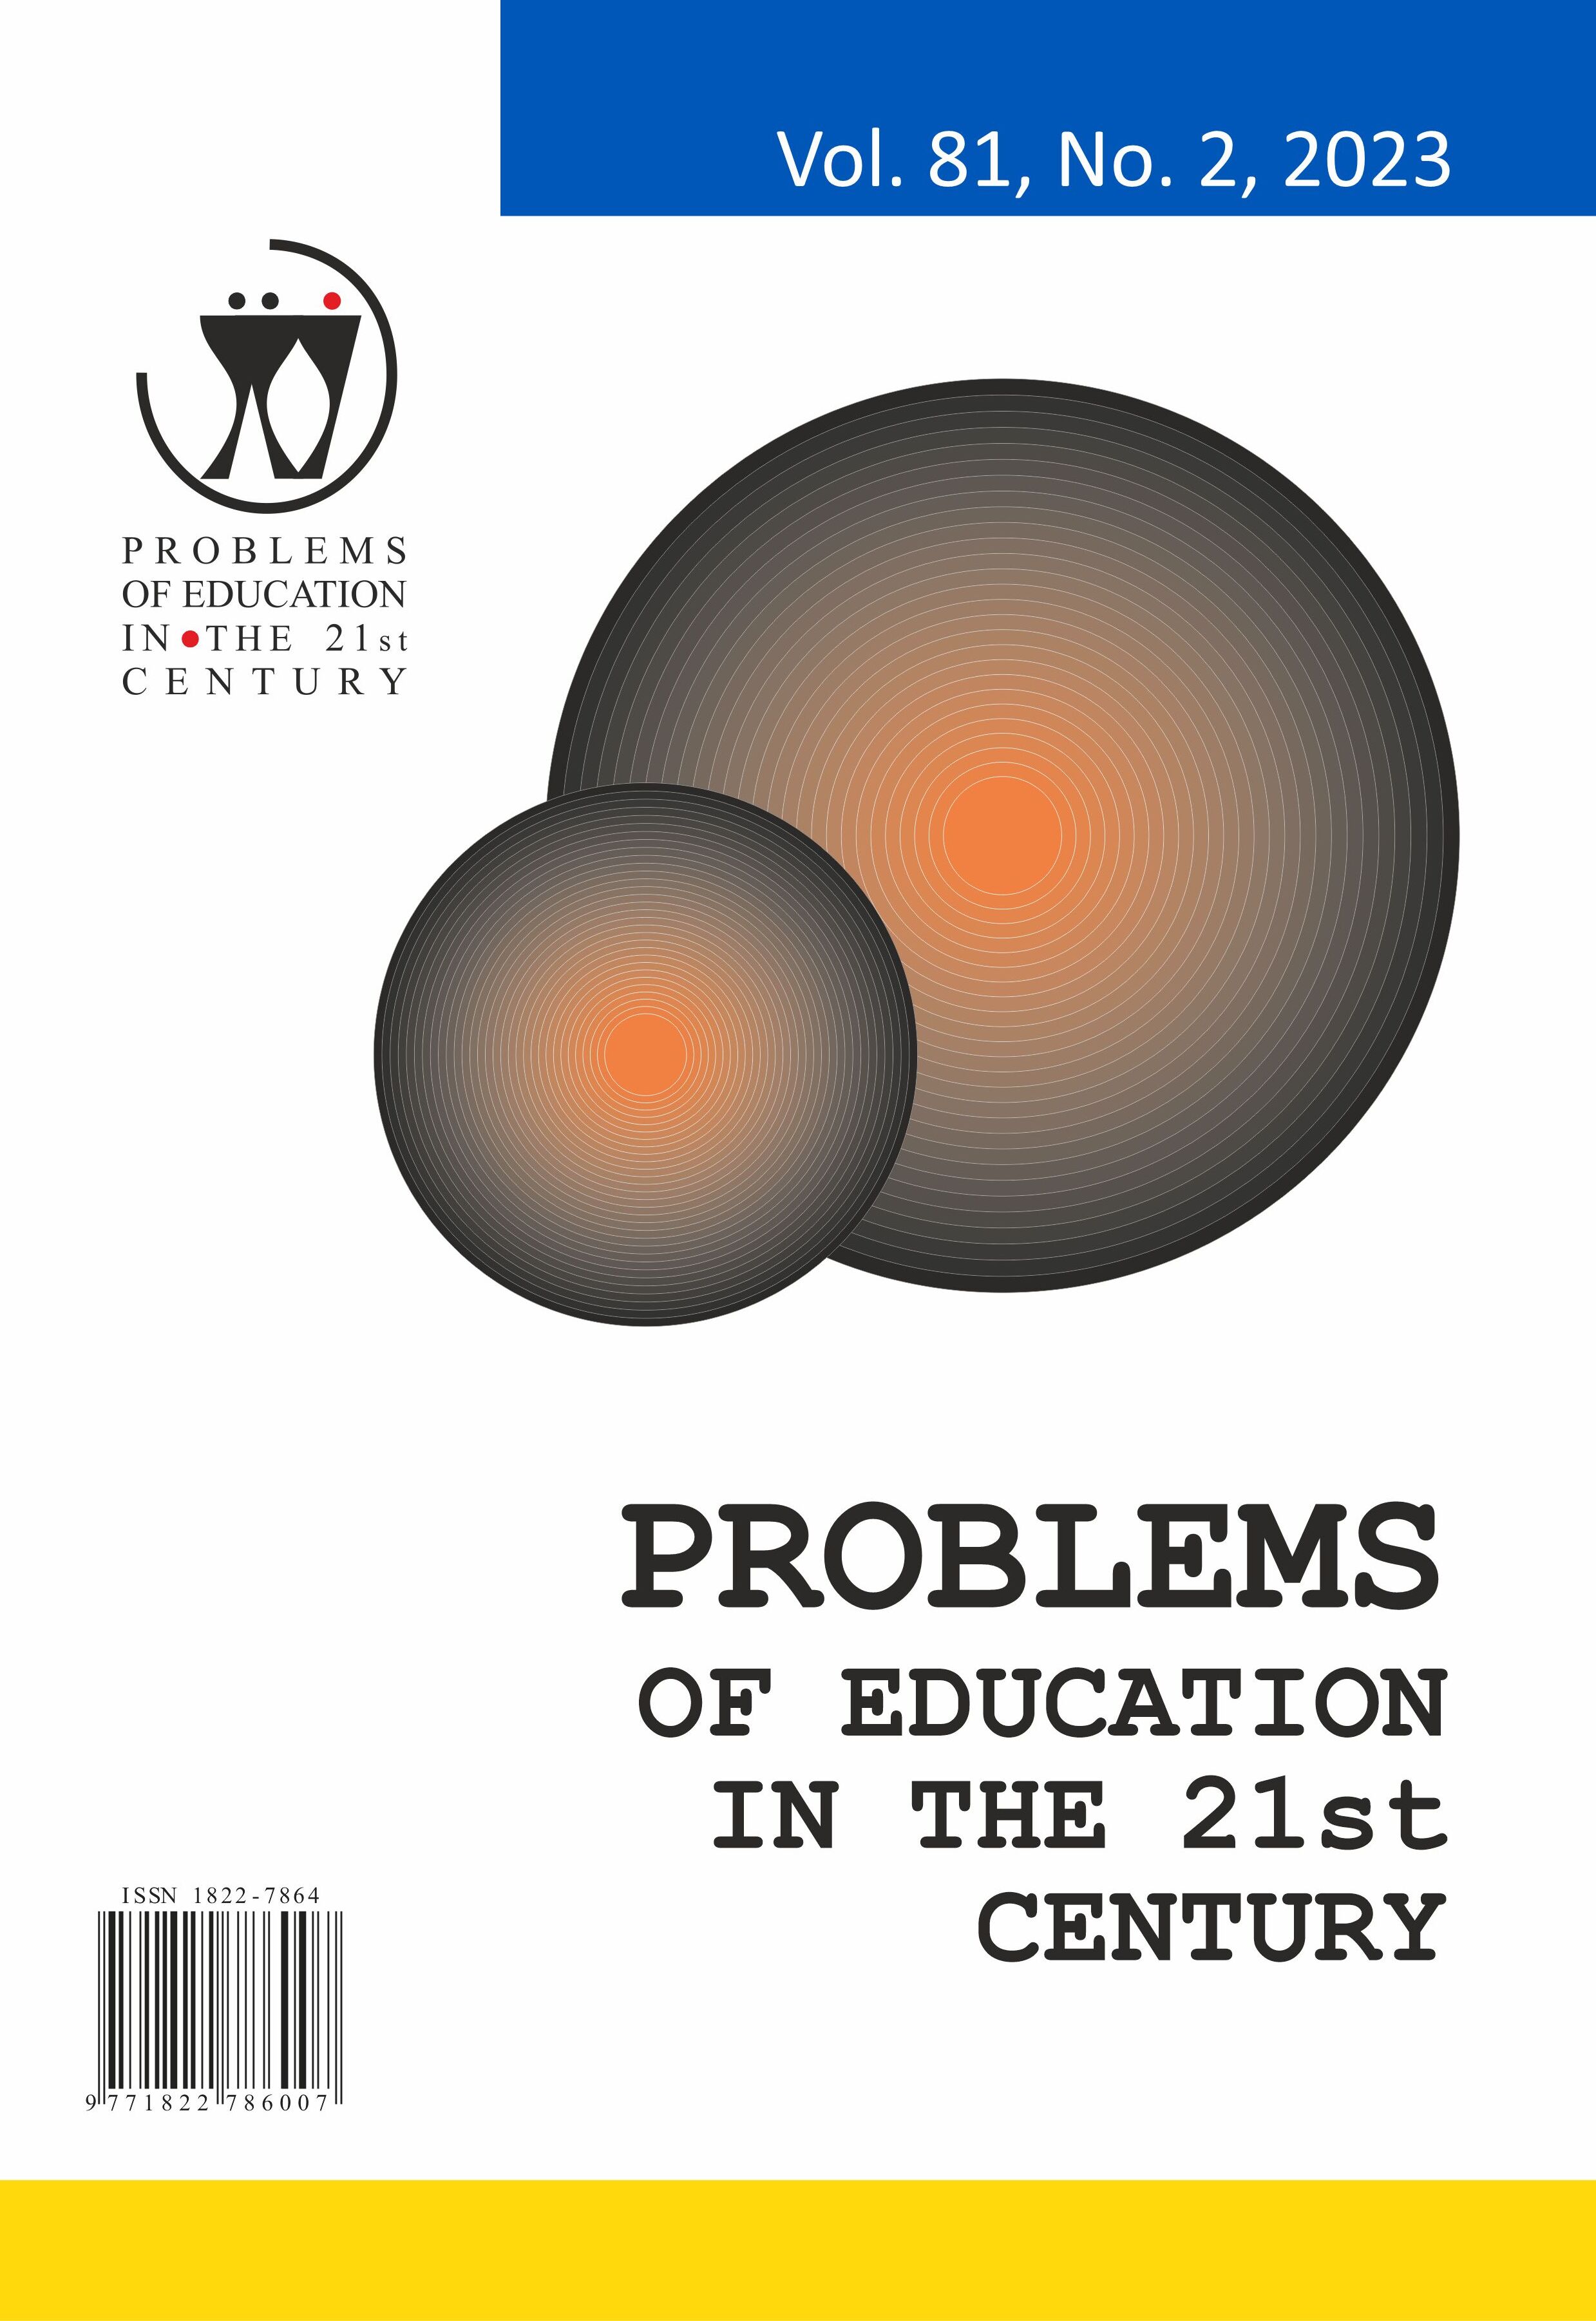 EXPLORING CURRENT TRENDS IN EDUCATION: A REVIEW OF RESEARCH TOPICS IN THE PROBLEMS OF EDUCATION IN THE 21ST CENTURY JOURNAL Cover Image